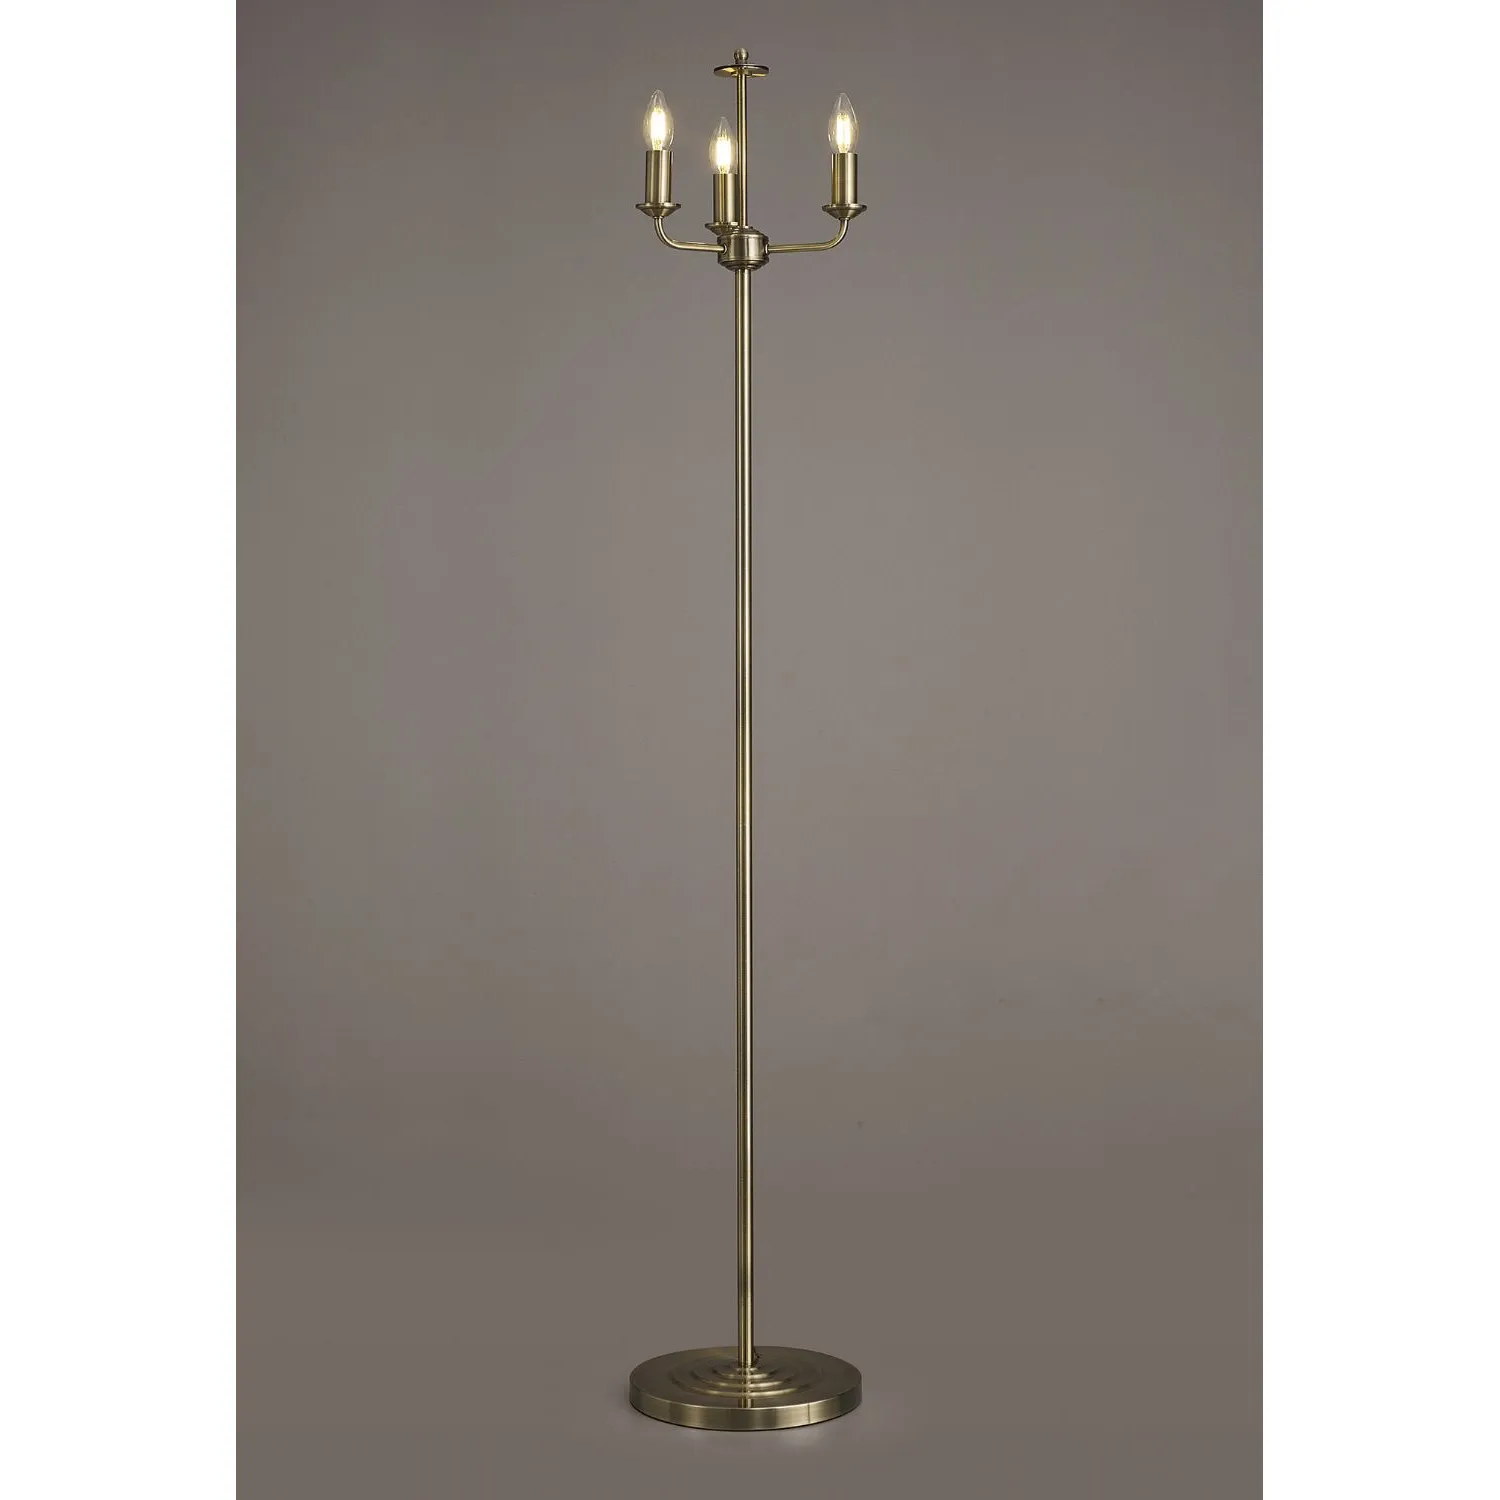 Banyan 3 Light Switched Floor Lamp Without Shade, E14 Antique Brass